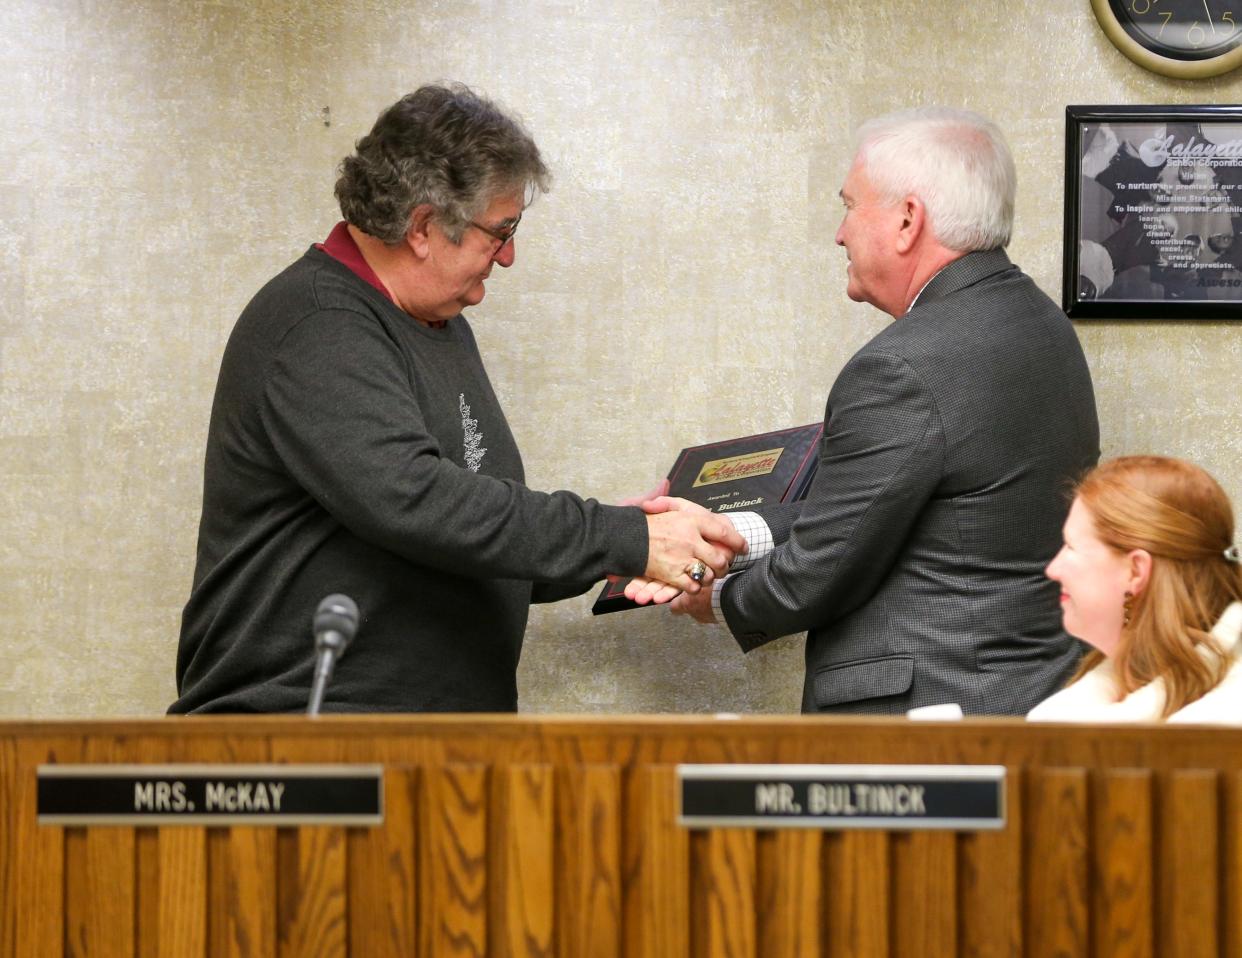 Lafayette School Corporation school board member David R. Moulton (District I) hands Stephen J. Bultinck (District VII) a plaque in thanks for his years of service to the district, on Monday, December 12, 2022, in Lafayette, Ind.